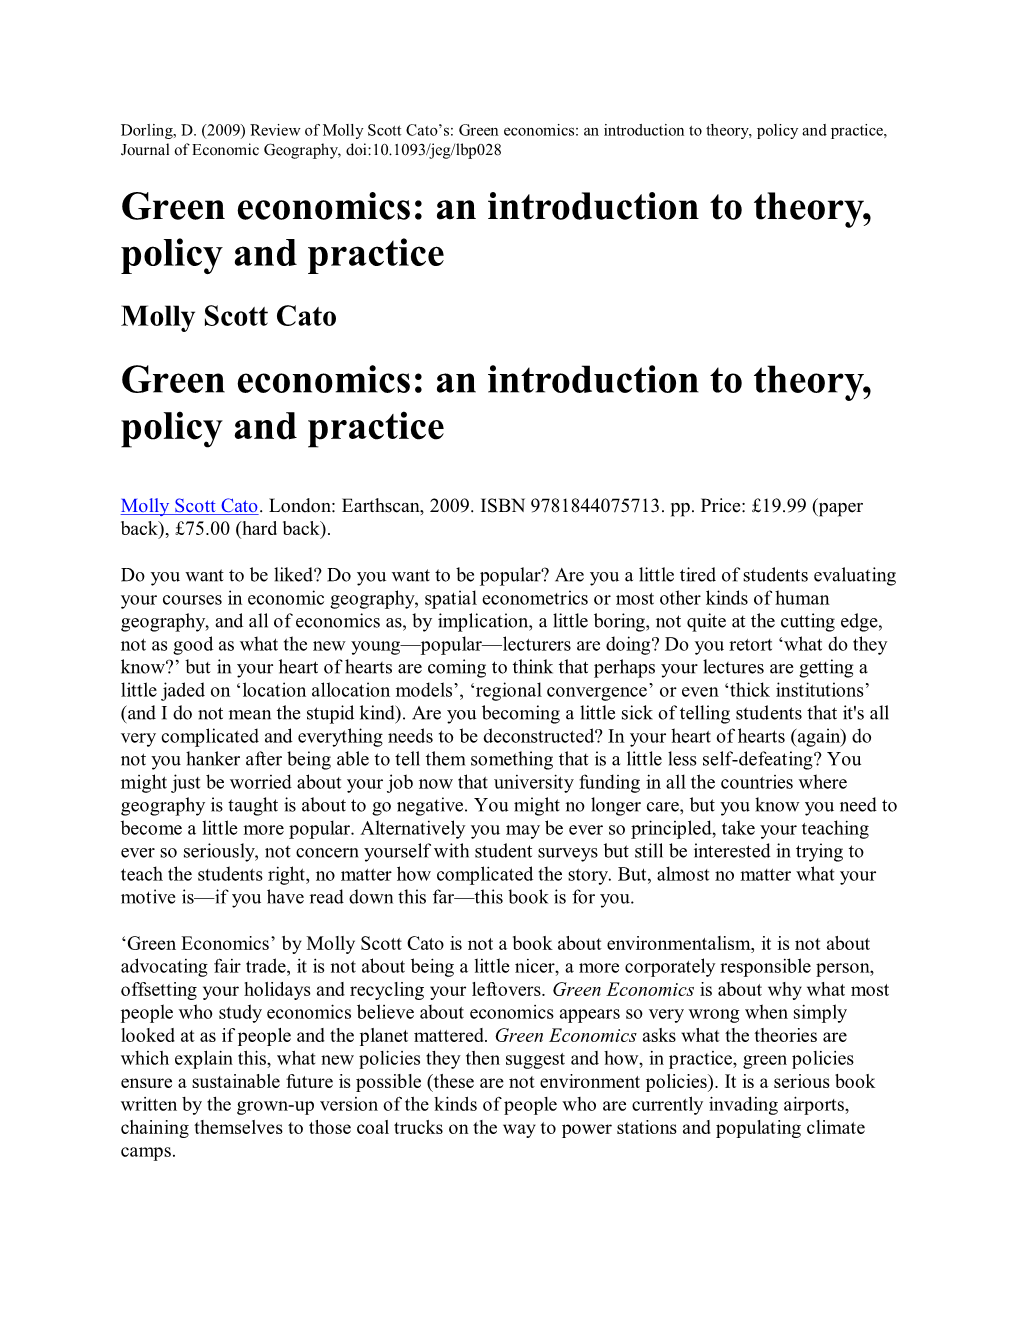 An Introduction to Theory, Policy and Practice Green Economics